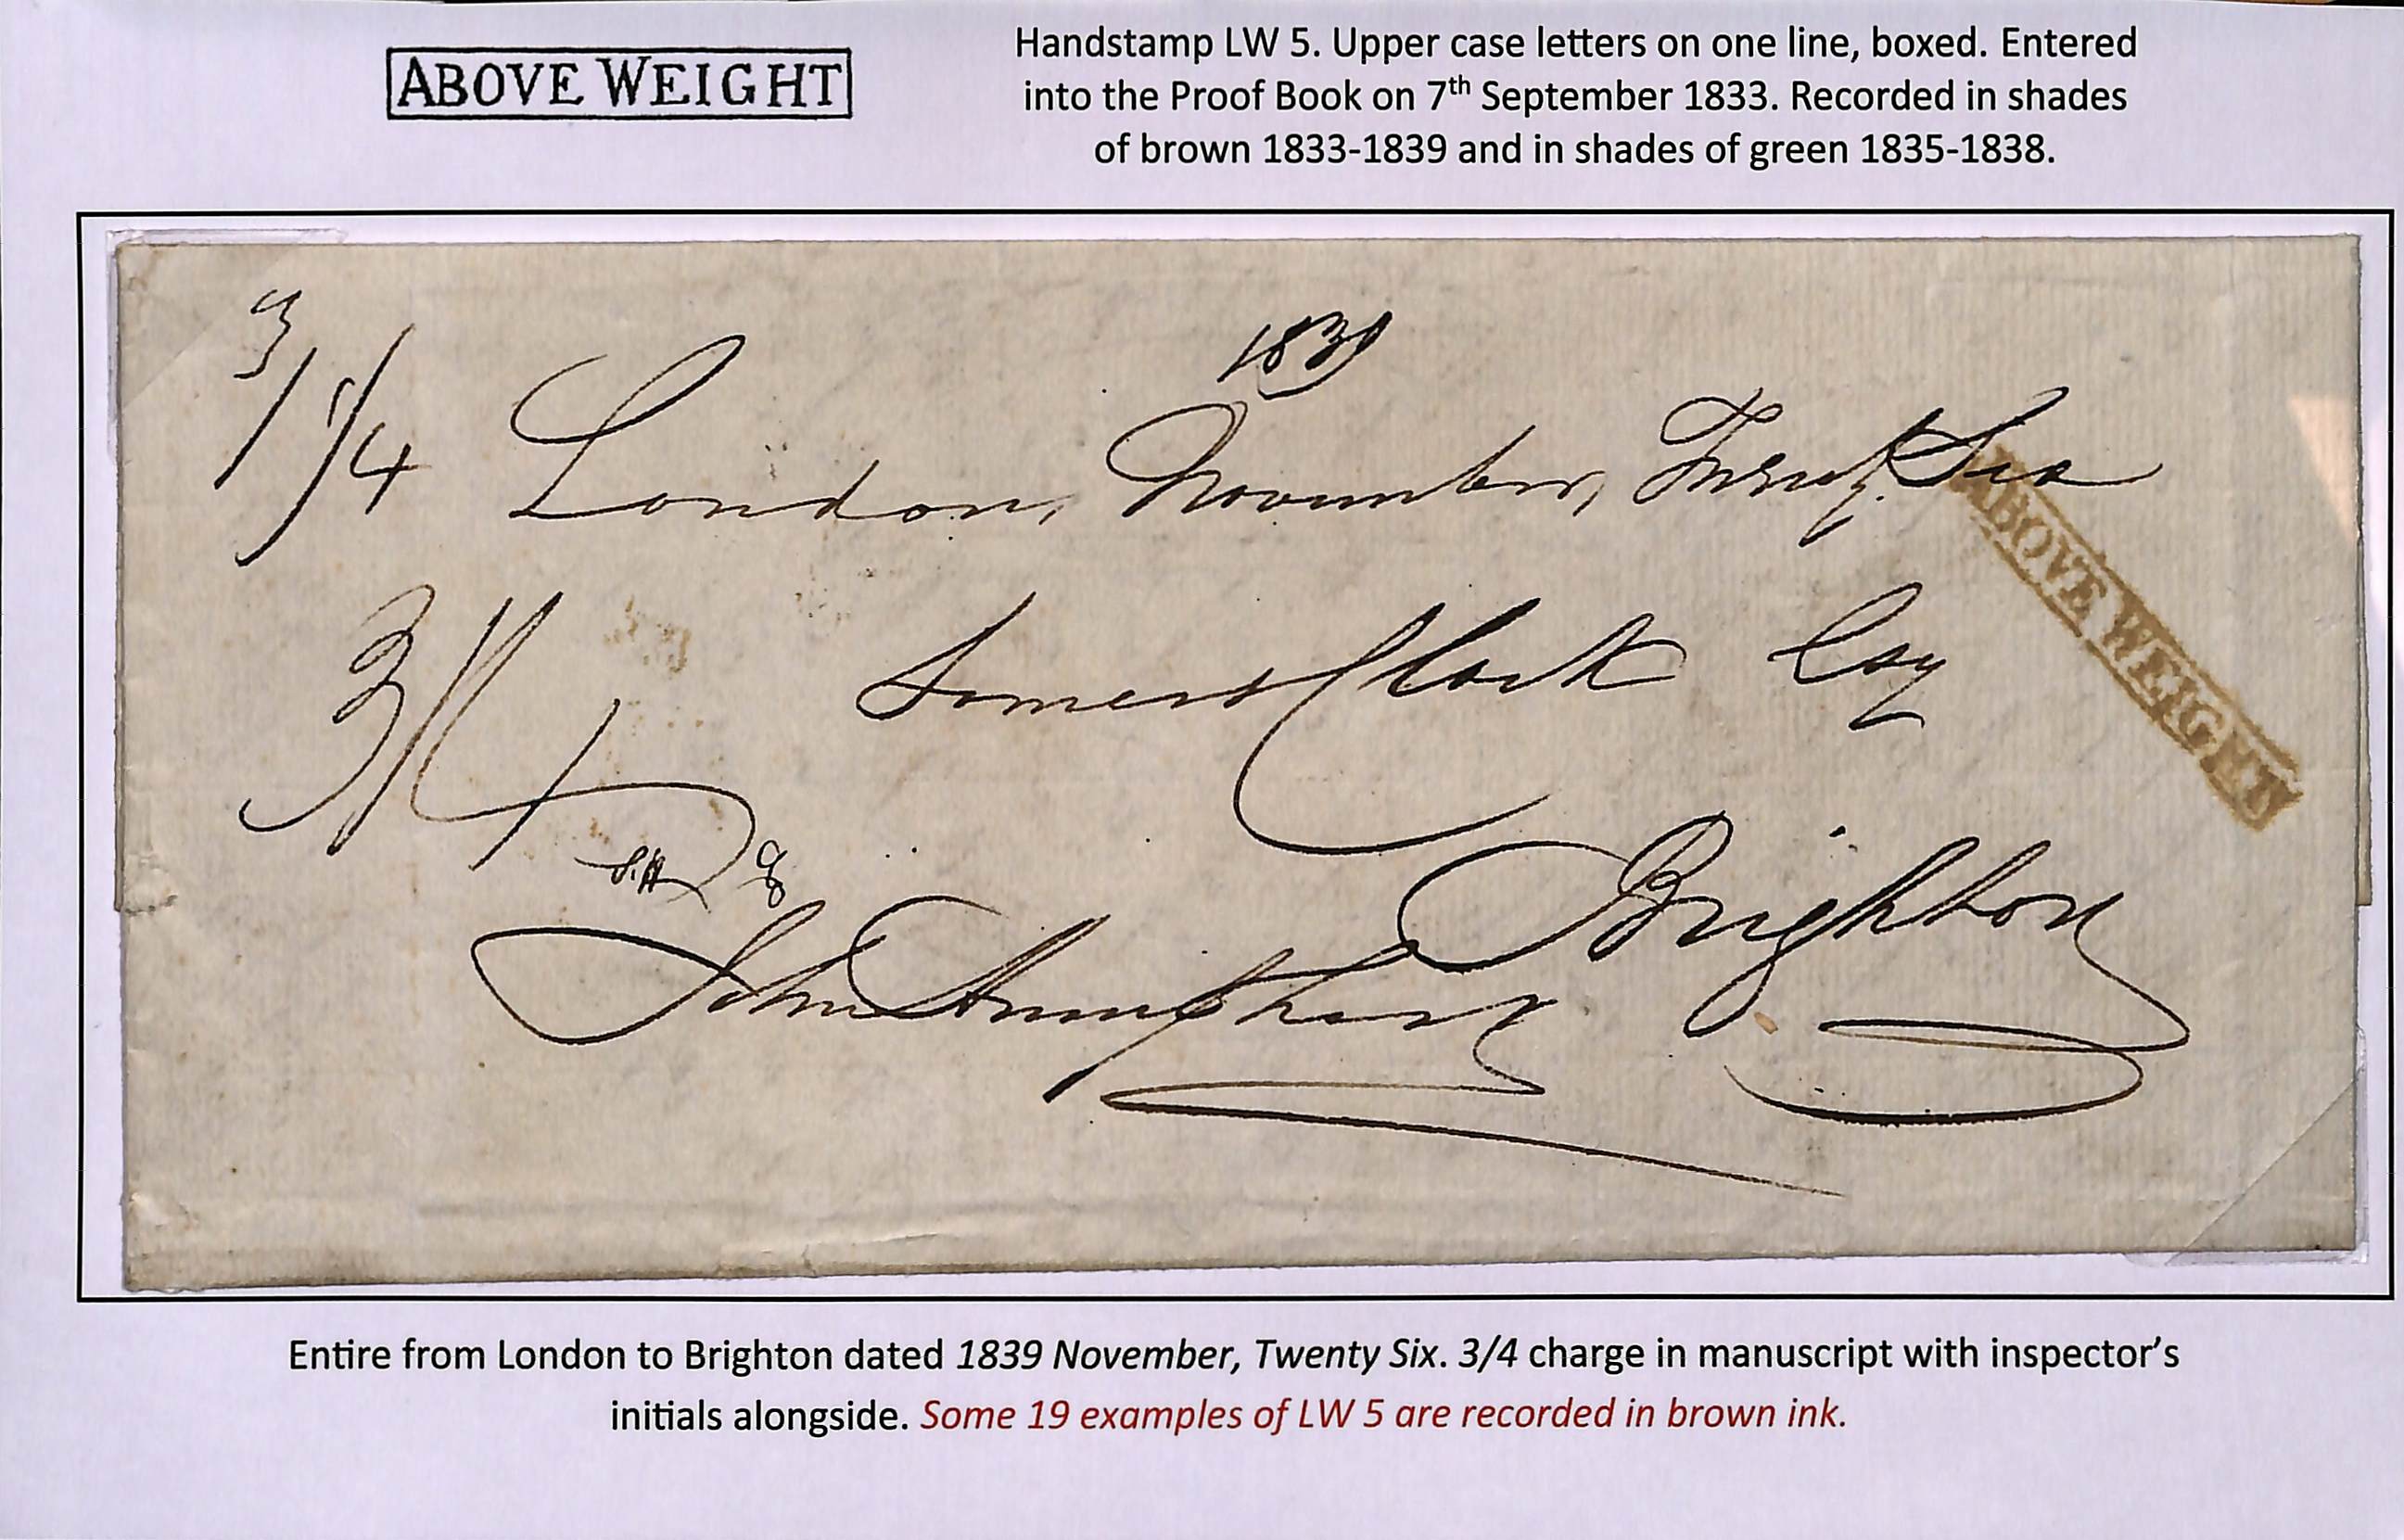 1839 (Nov 26) Entire letter from London to Brighton, charged 3/4, with boxed "ABOVE WEIGHT" in brown